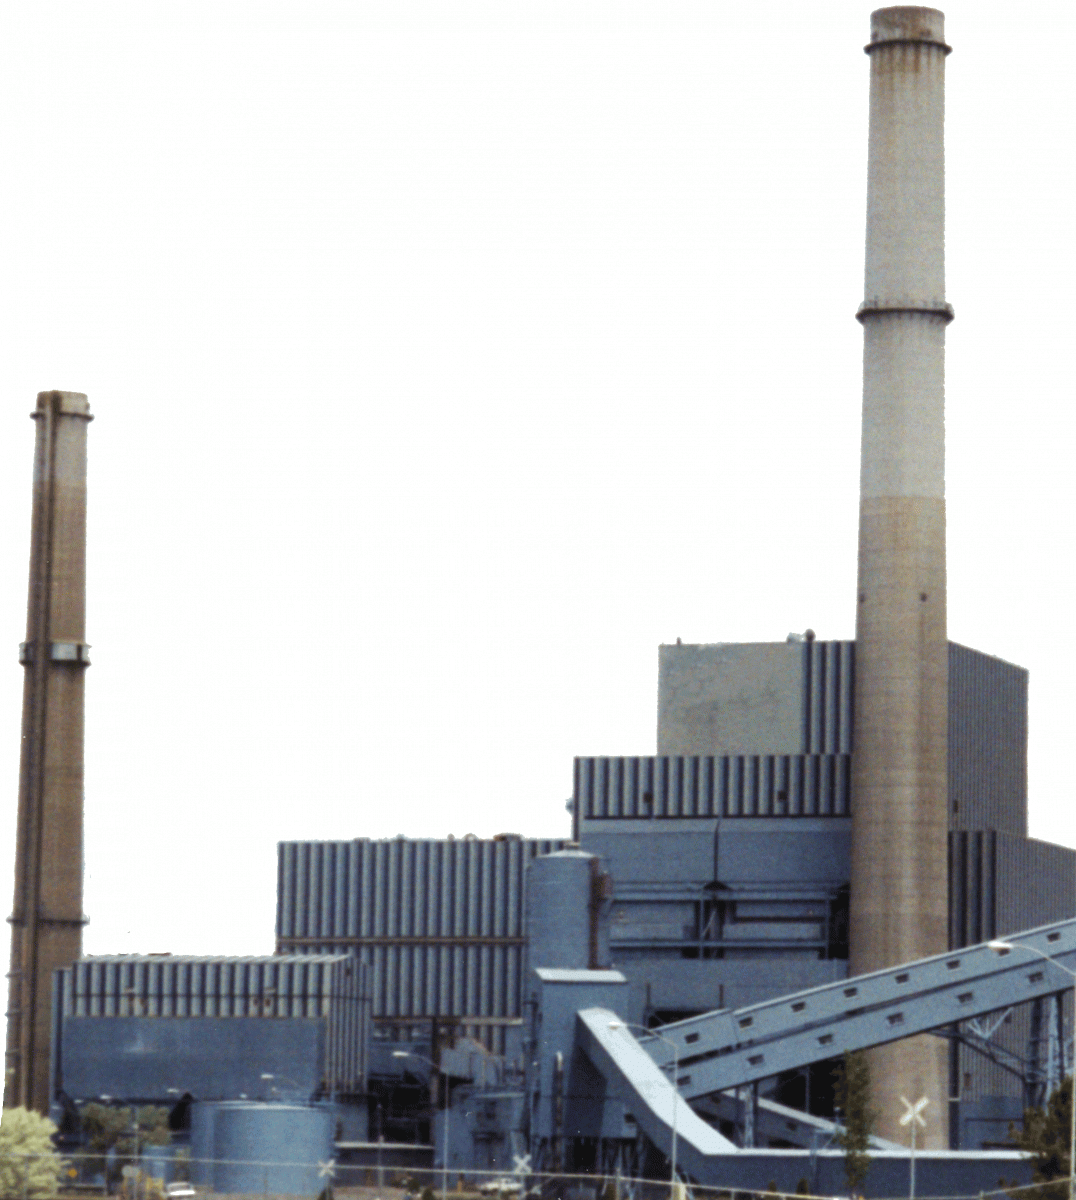 generic coal-fired power plant